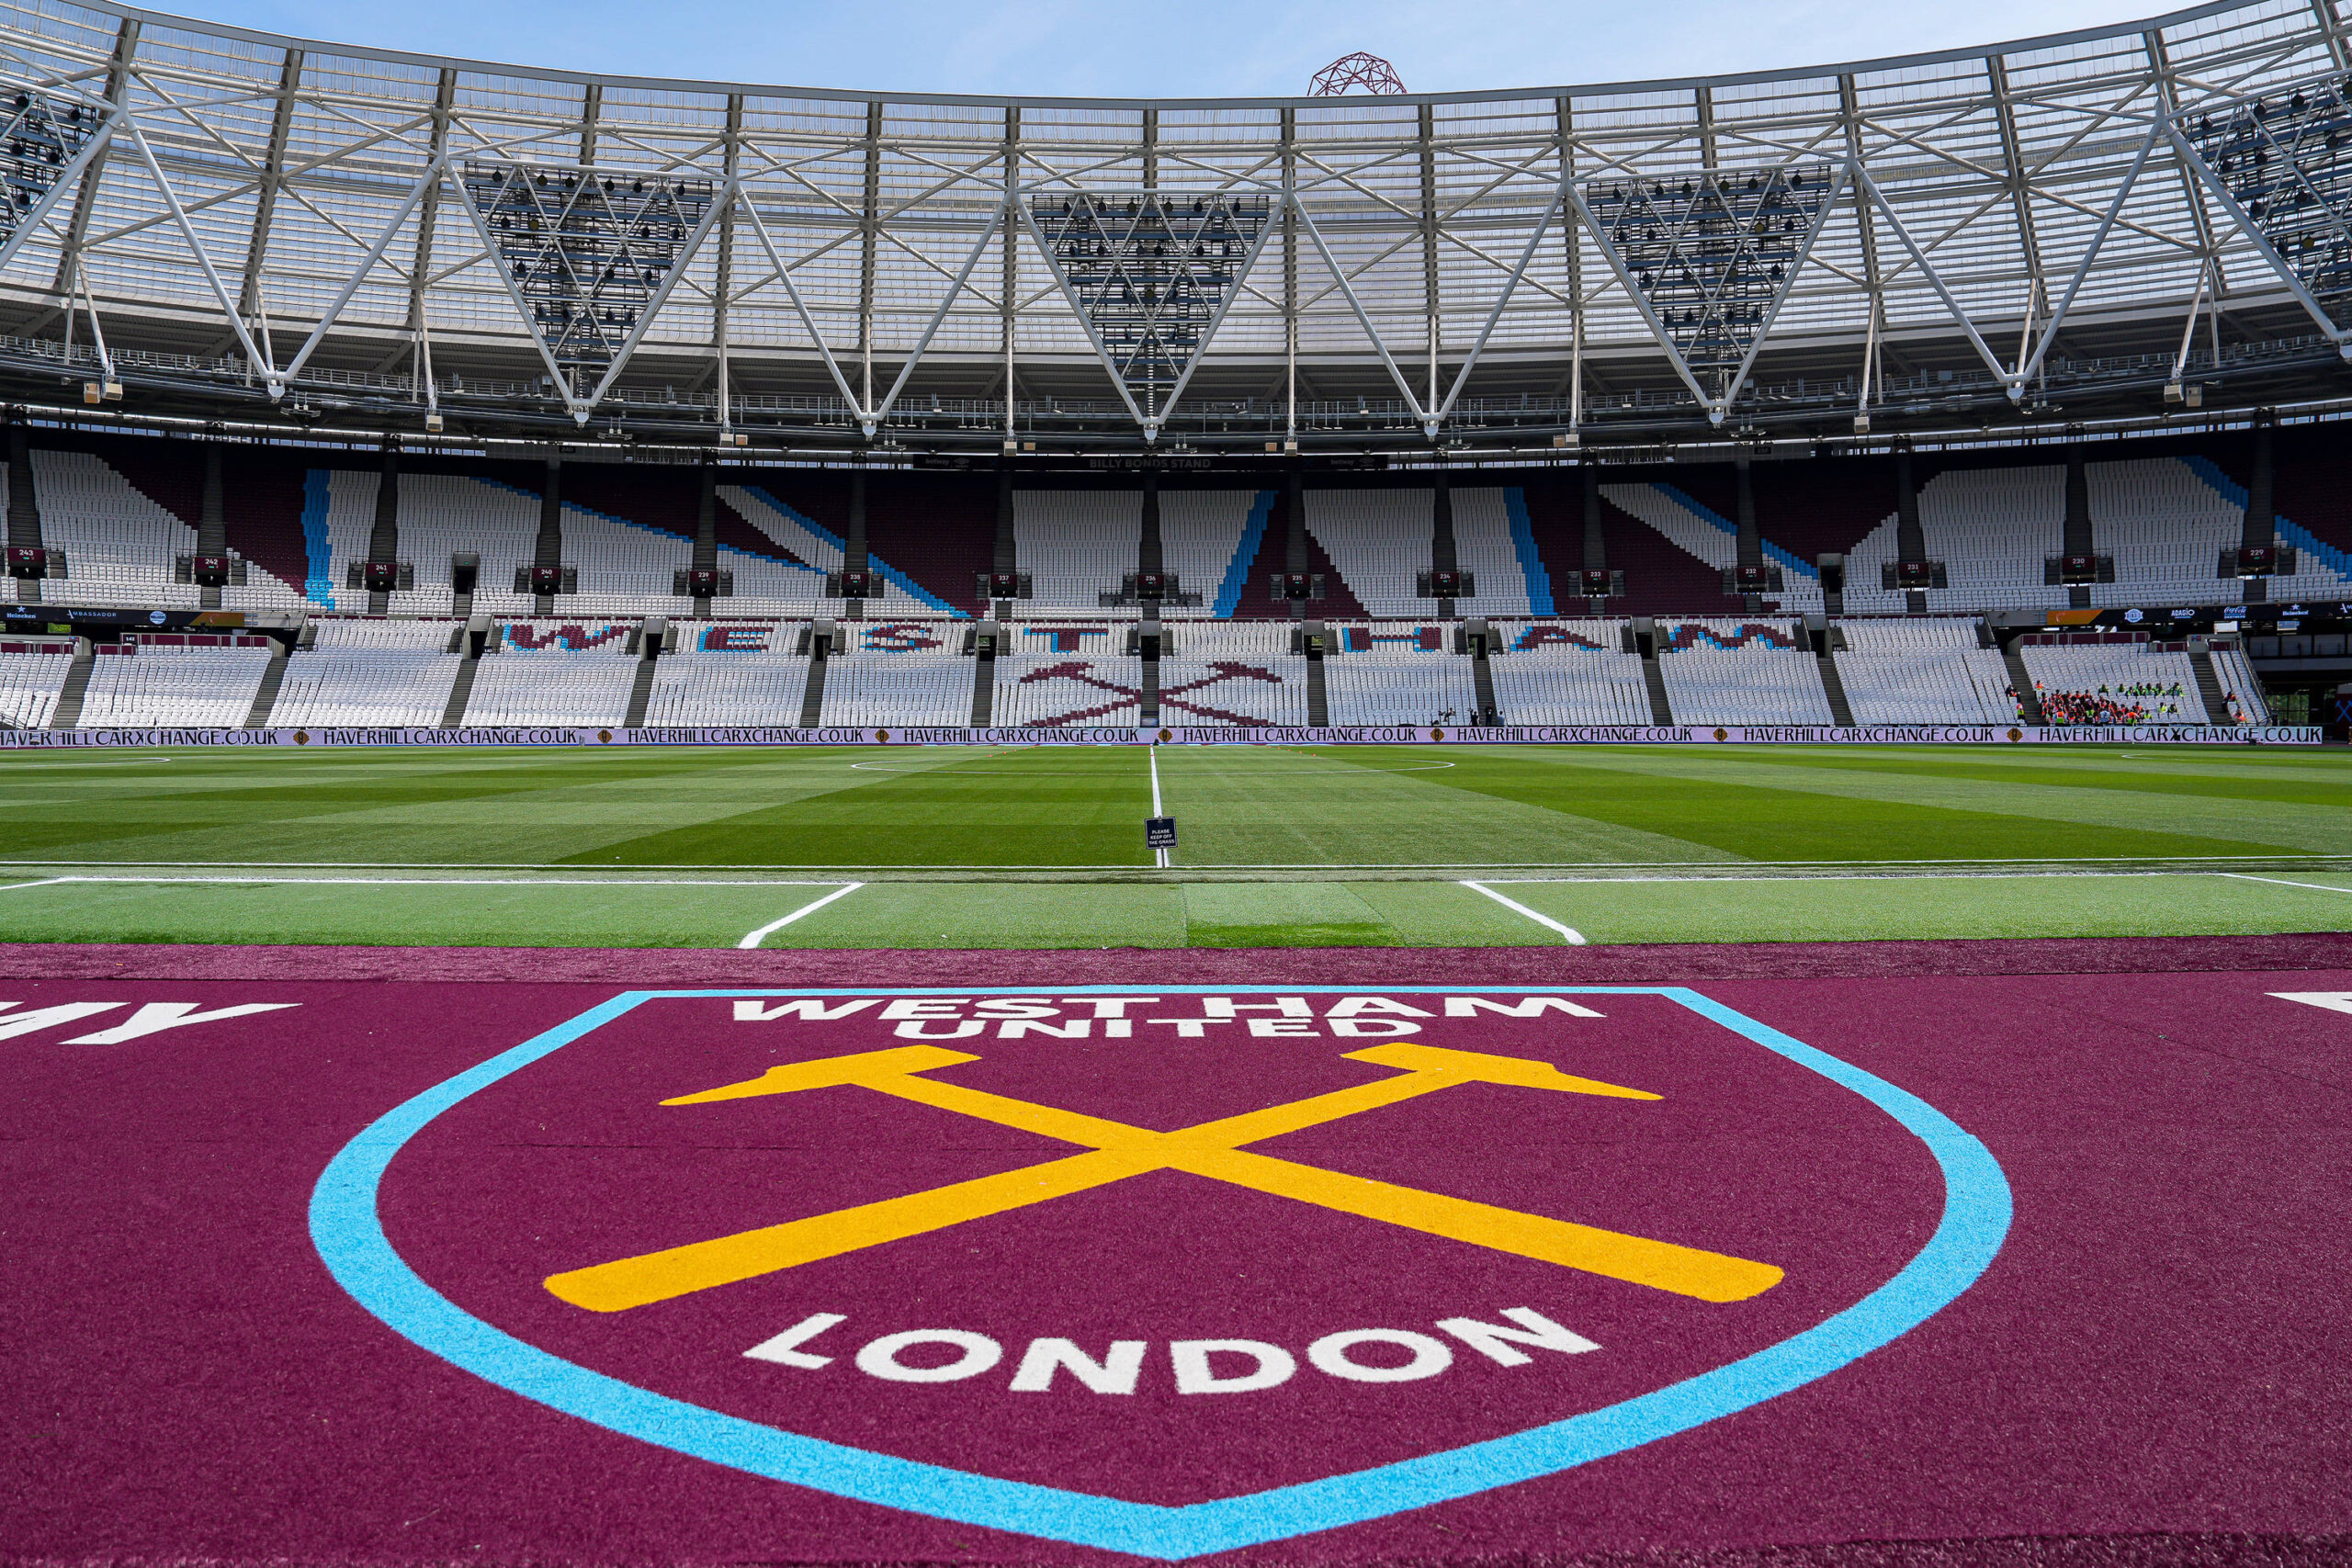 Image of the London Stadium showing the West Ham club badge on the ground of the entranceway Max Killman West Ham logo